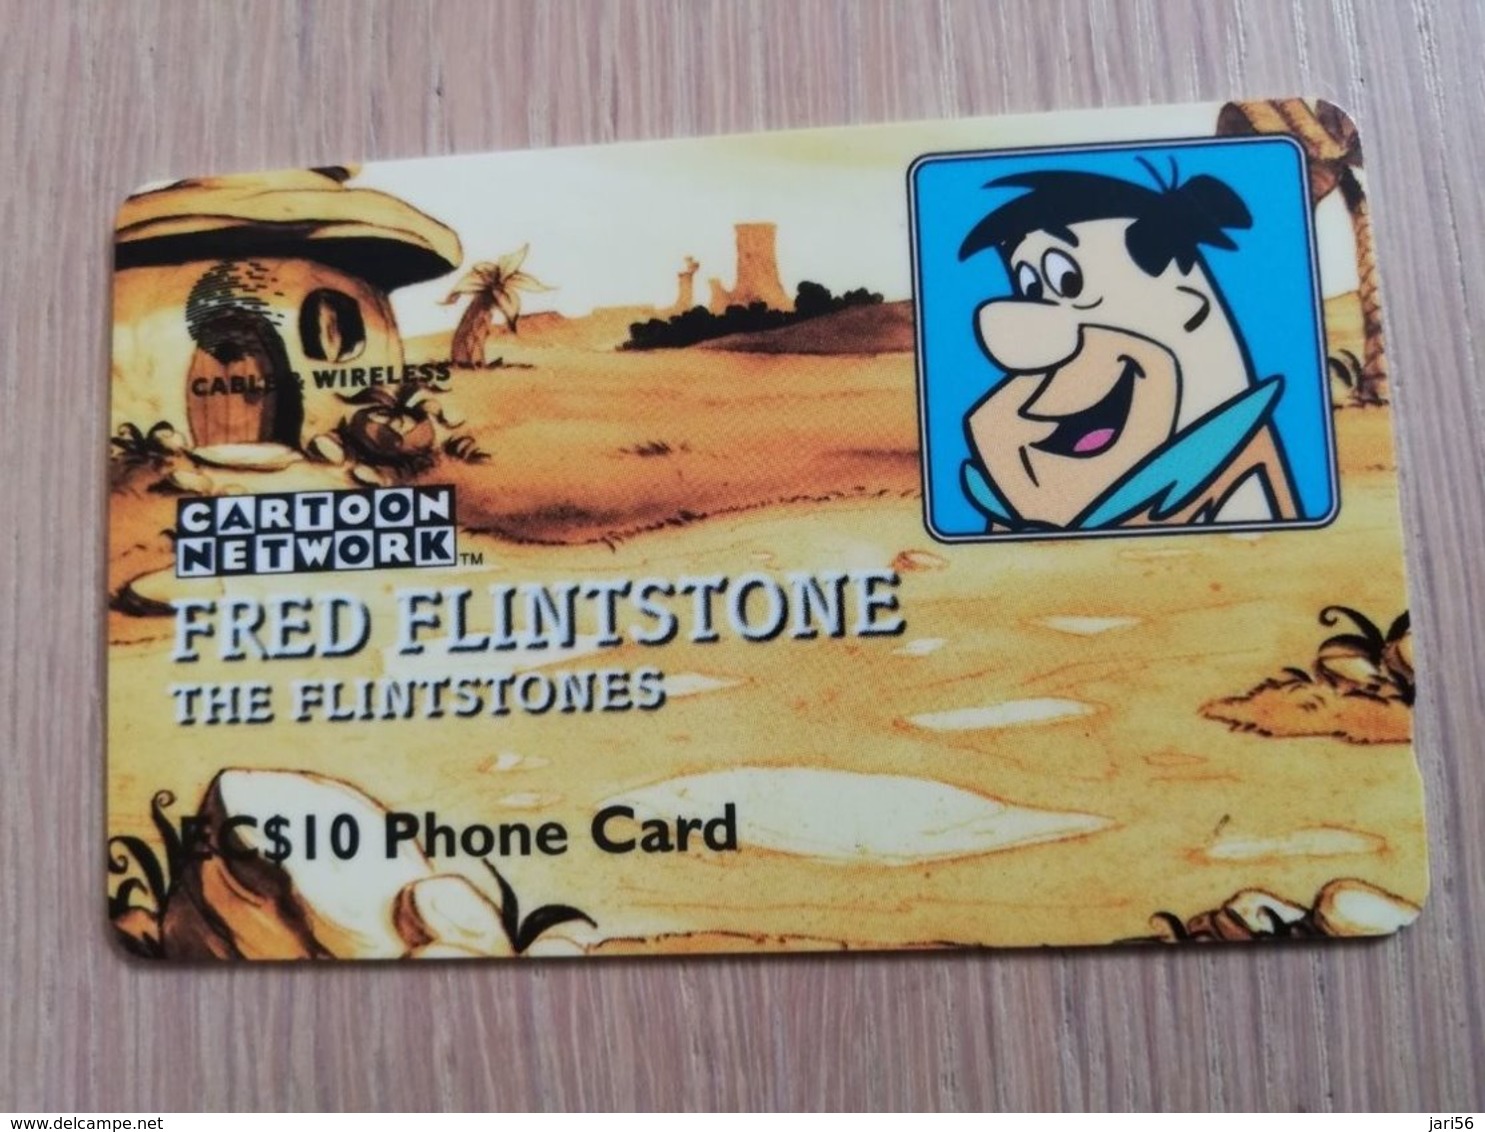 ST LUCIA    $ 10   CABLE & WIRELESS  STL-277D  277CSLD   FRED FLINSTONE     Fine Used Card ** 2452** - St. Lucia